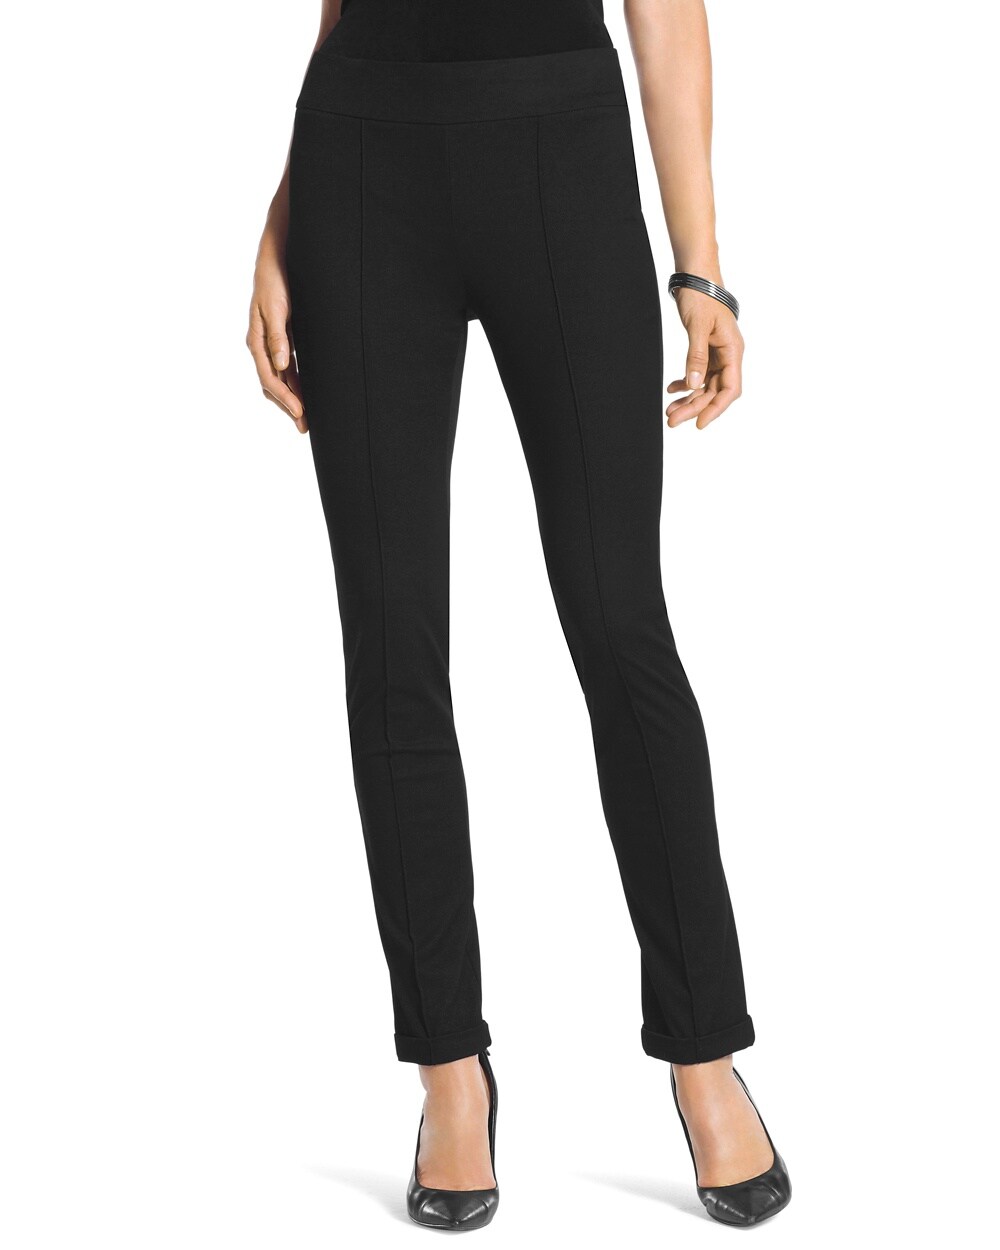 Travelers Collection Crepe Cuffed Pants